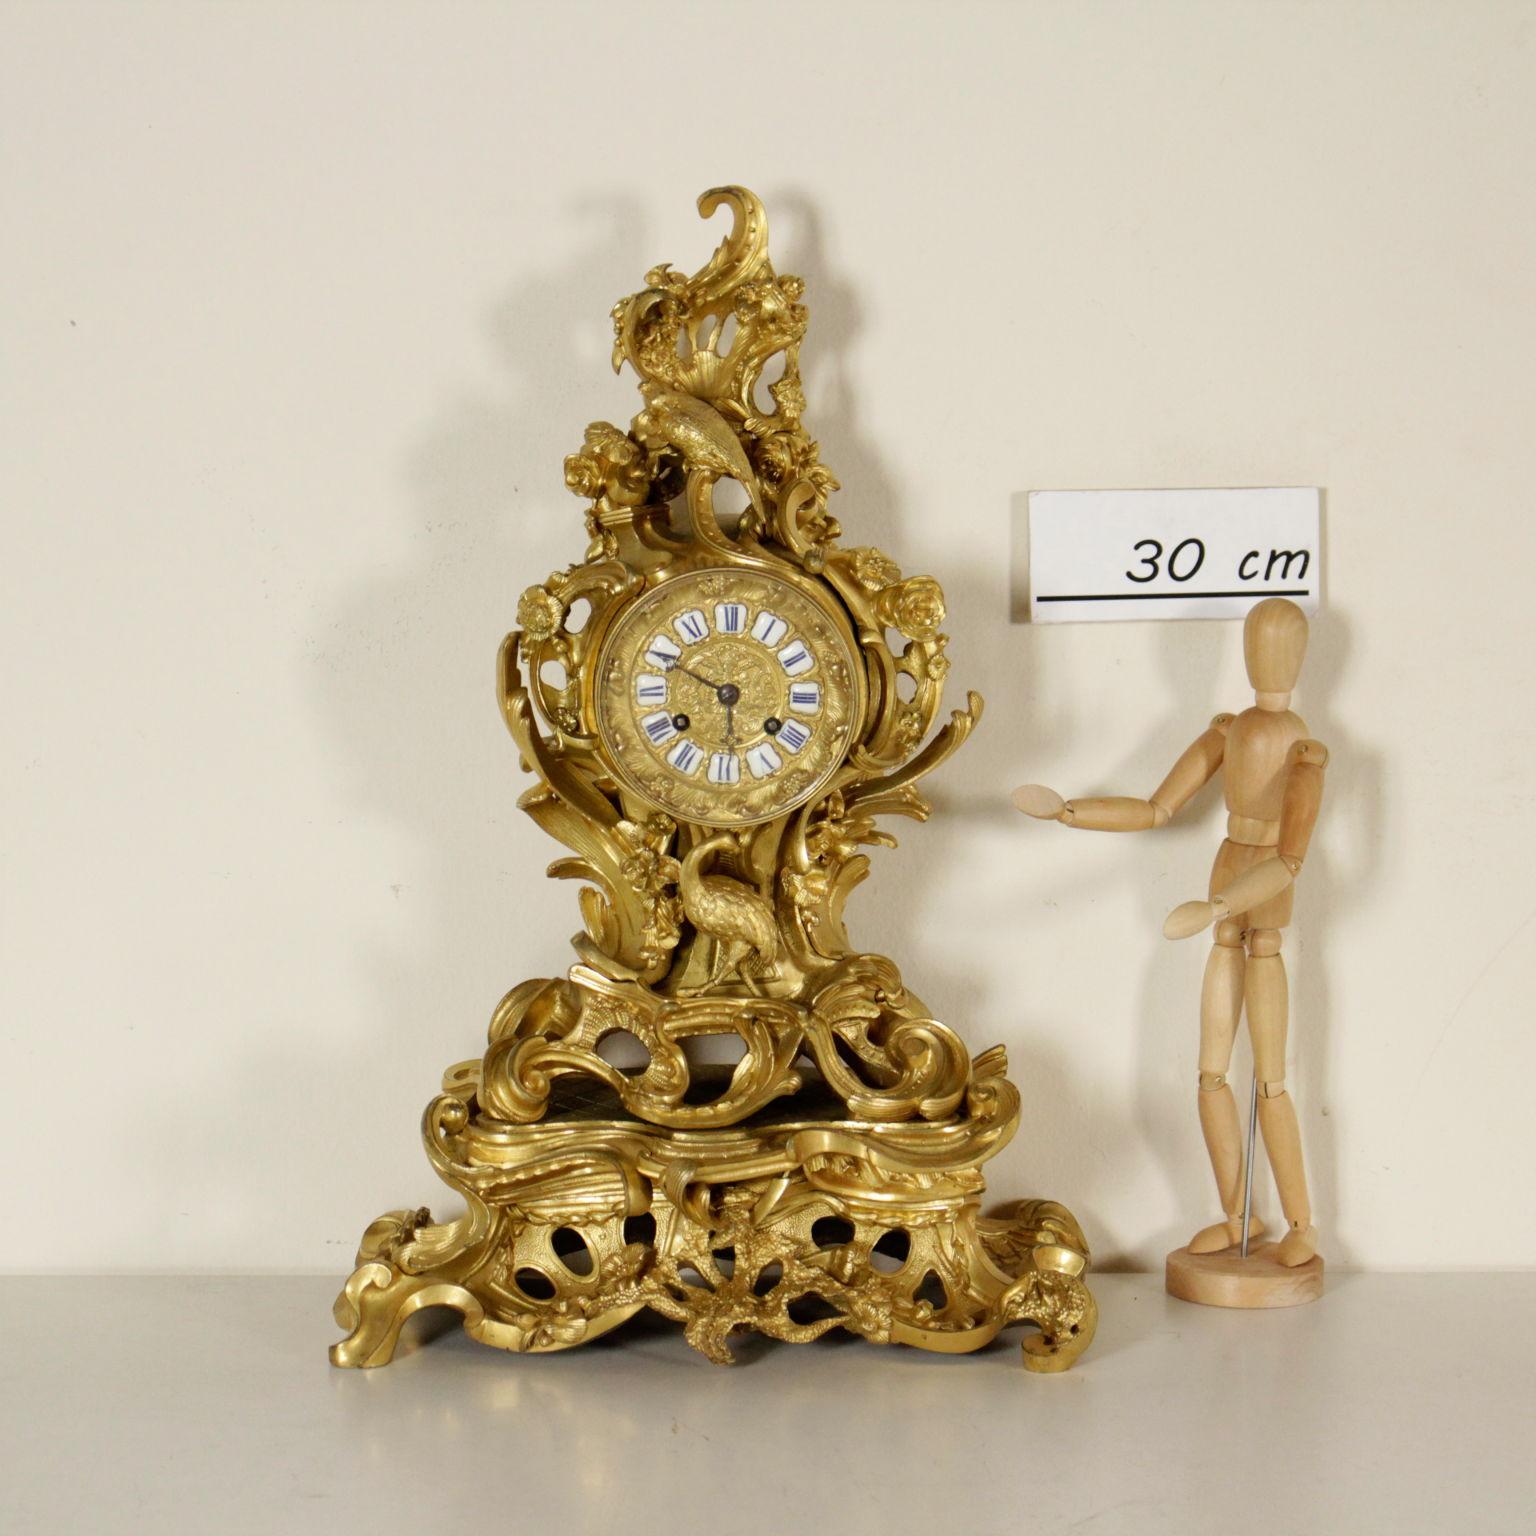 A mantel clock, Rococo style, chiseled and gilded bronze. Wide basement with volutes, foam, vegetable and animal motifs. Bronze face with Roman numbers drawn on glazed metal. Iron handles, finely perforated. Mechanism branded 'Pons 1927'.